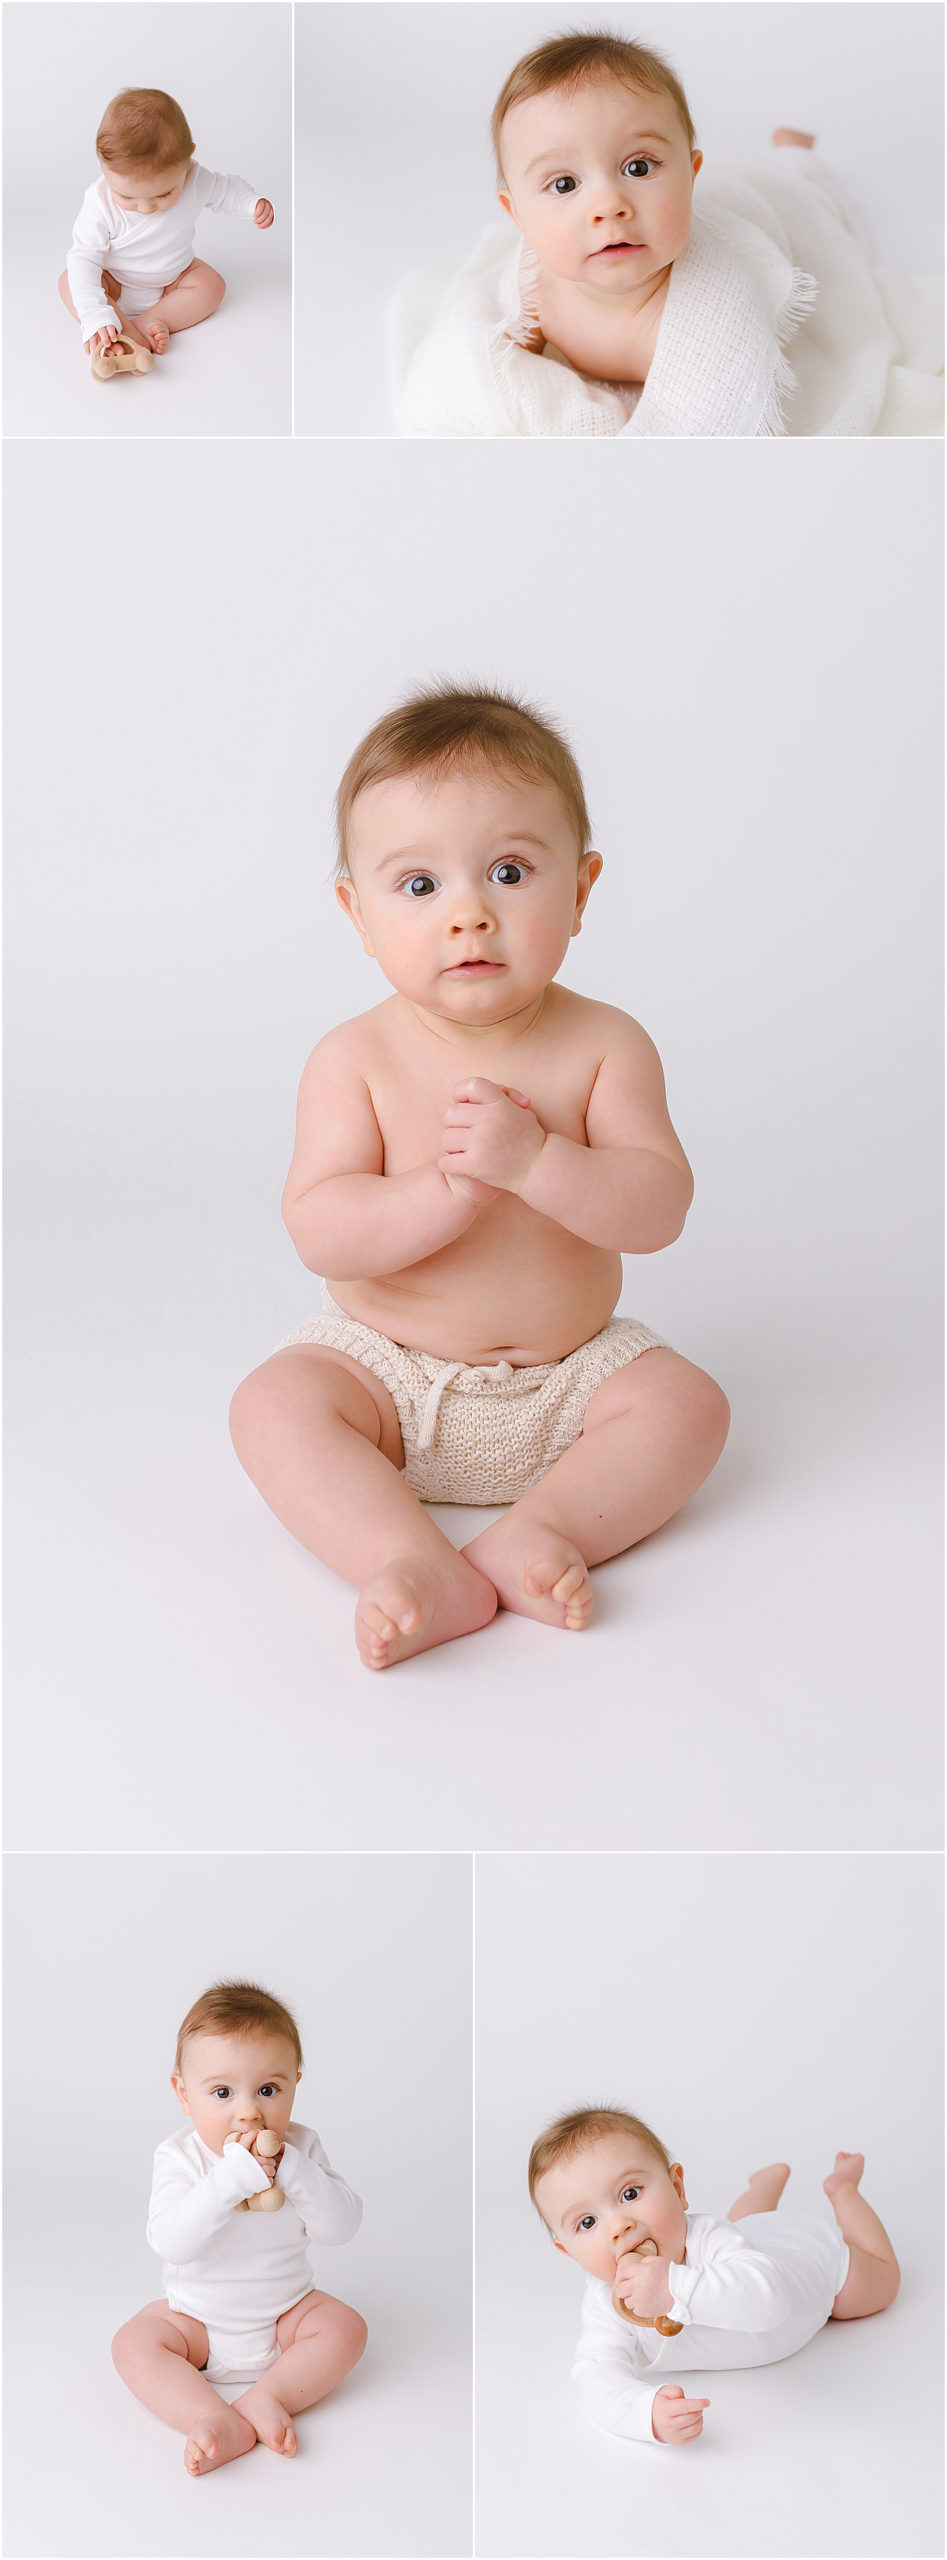 Tots On Target - A child's sitting posture is typically noted by evaluating  therapists as it gives us lots of information about a child's strength and  endurance for play and classroom requirements.